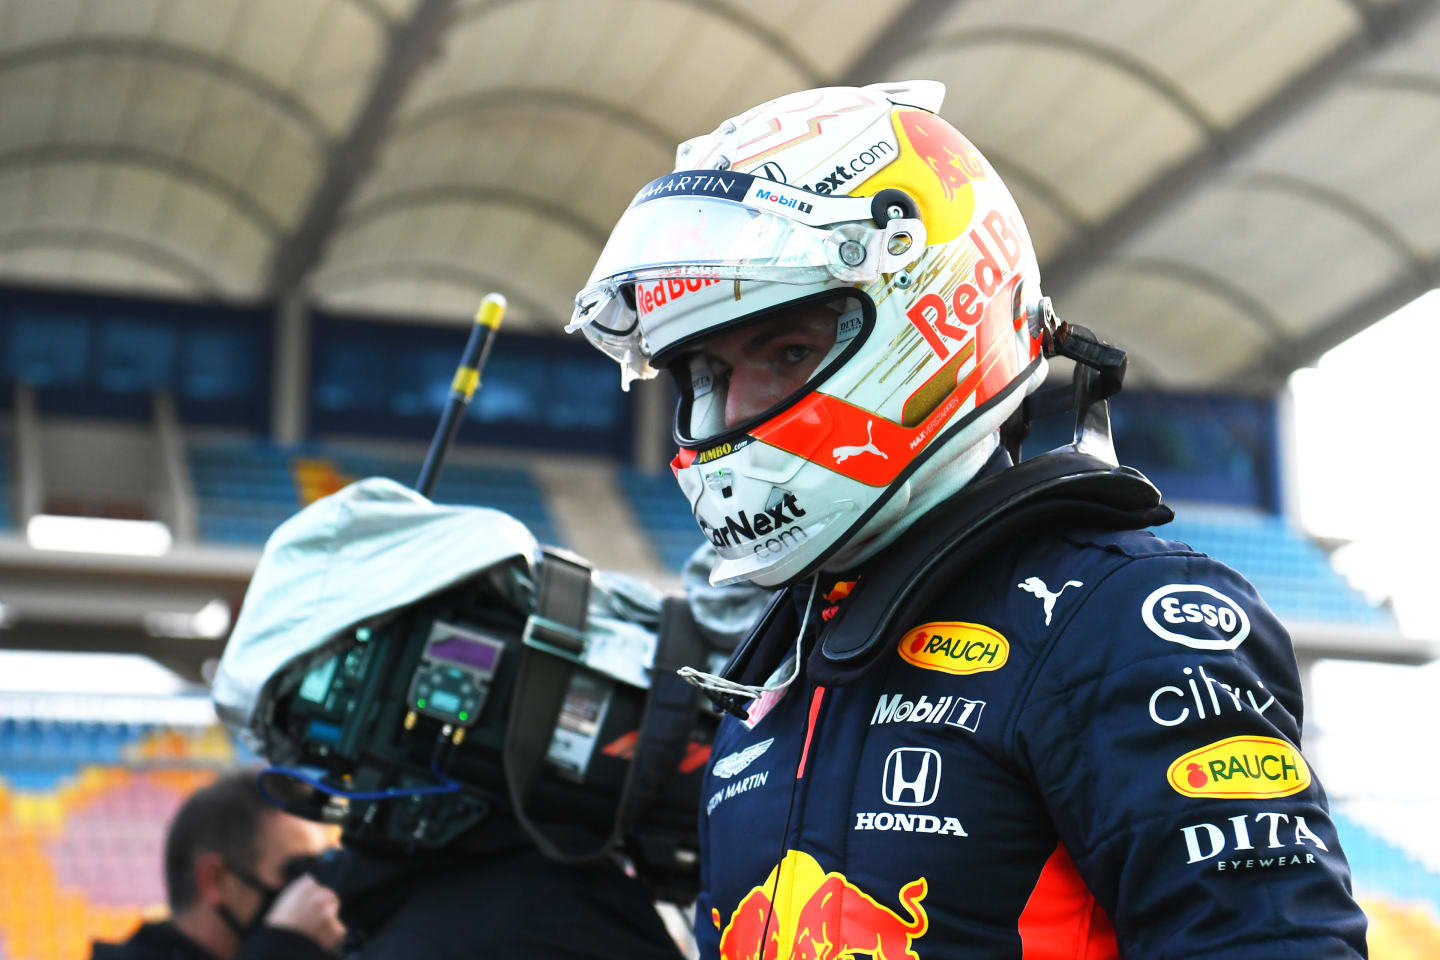 ISTANBUL, TURKEY - NOVEMBER 14: Second placed qualifier Max Verstappen of Netherlands and Red Bull